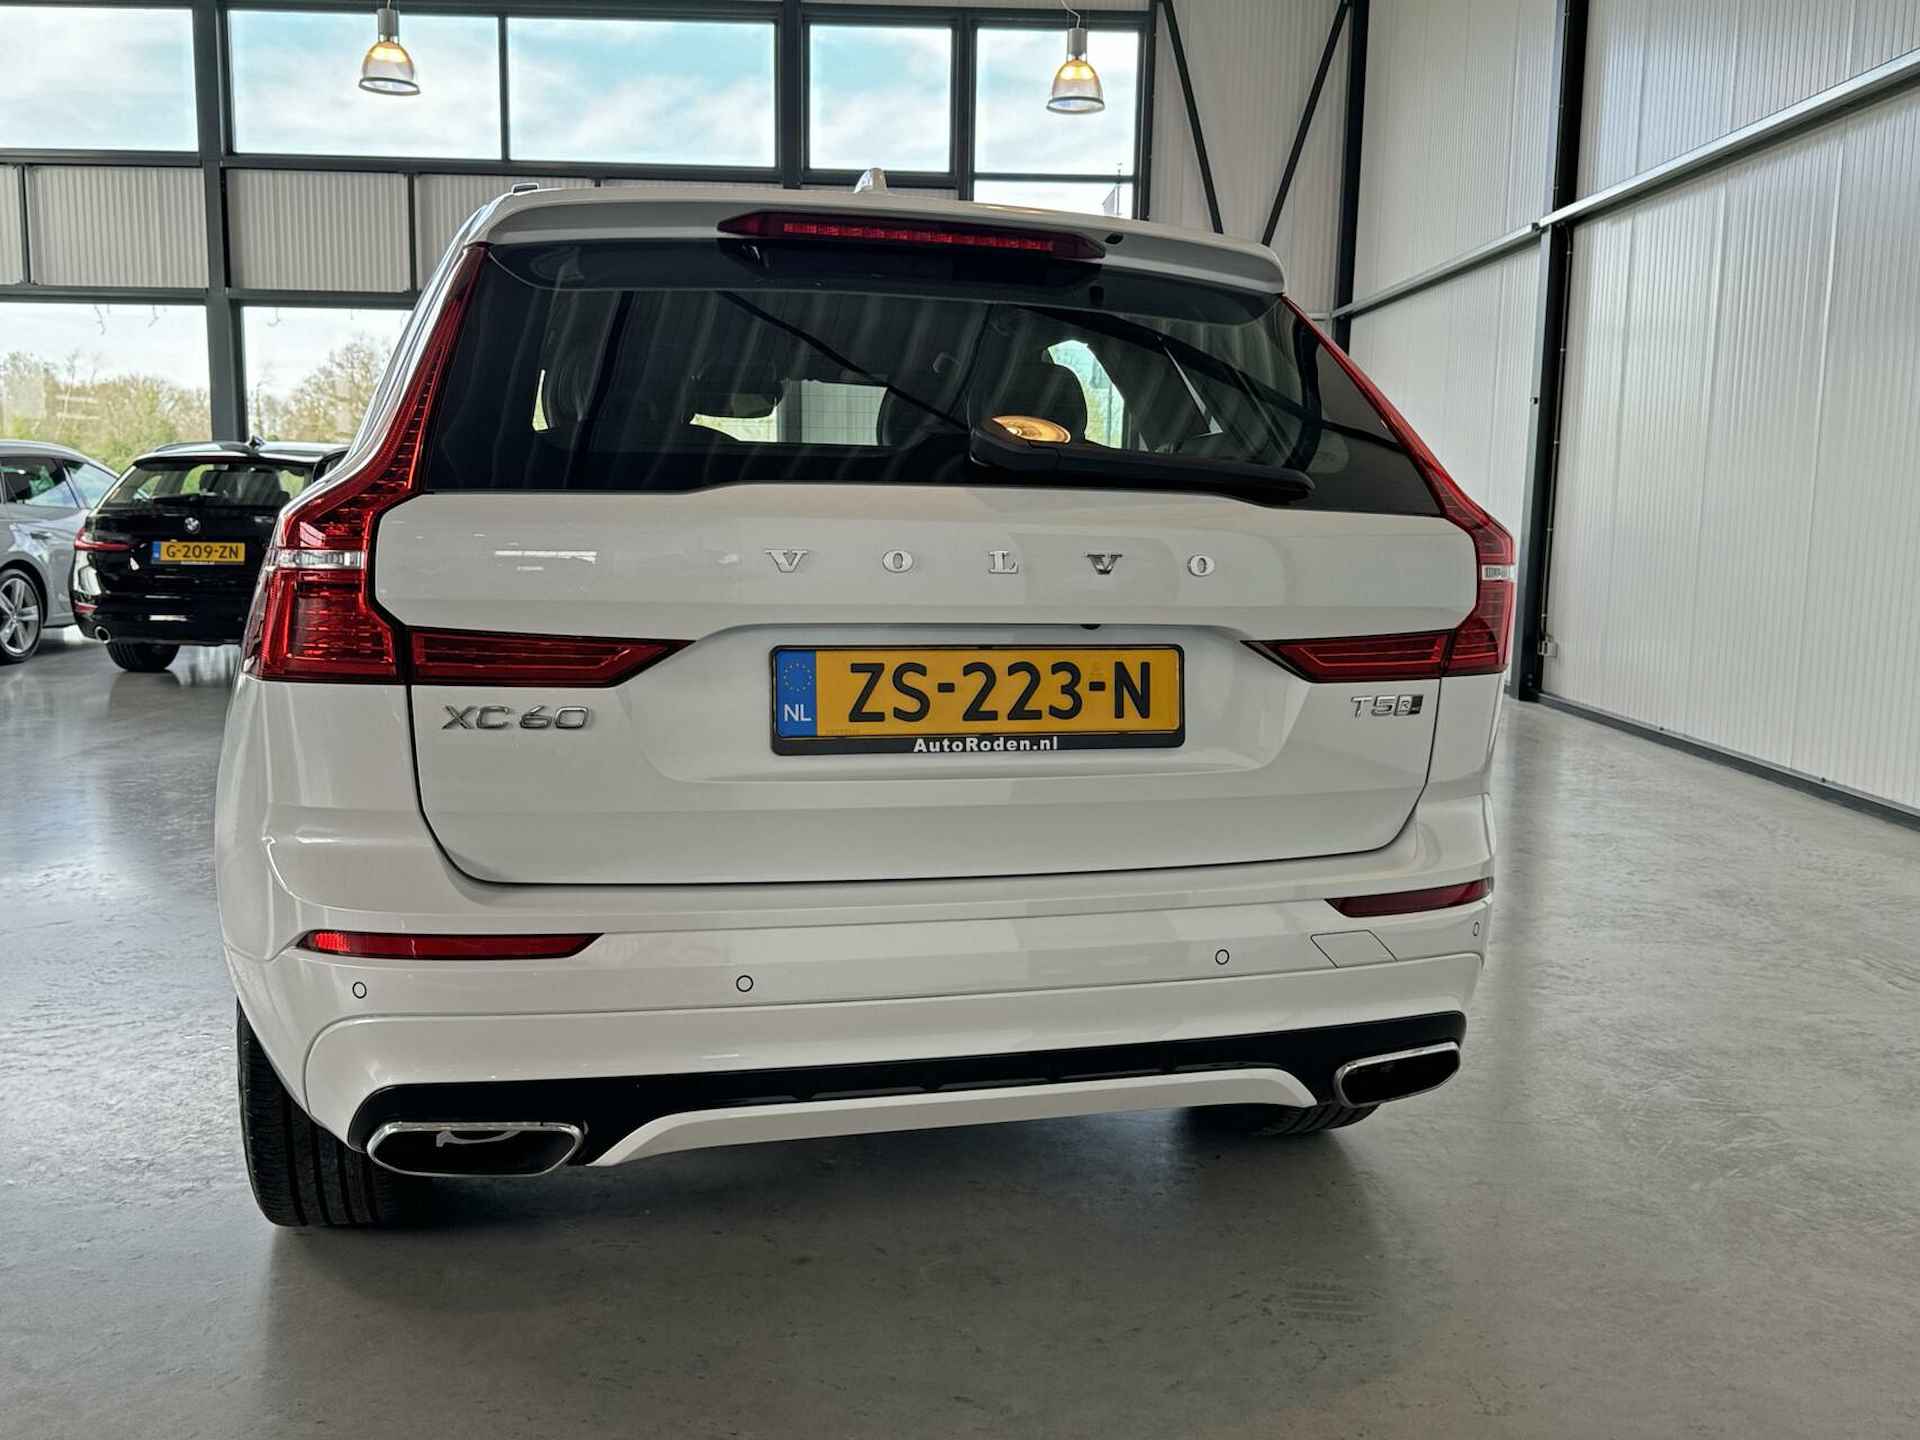 Volvo XC60 2.0 T5 184Kw AWD R-Design Geartronic Inscription Plus|Luchtvering - 10/44